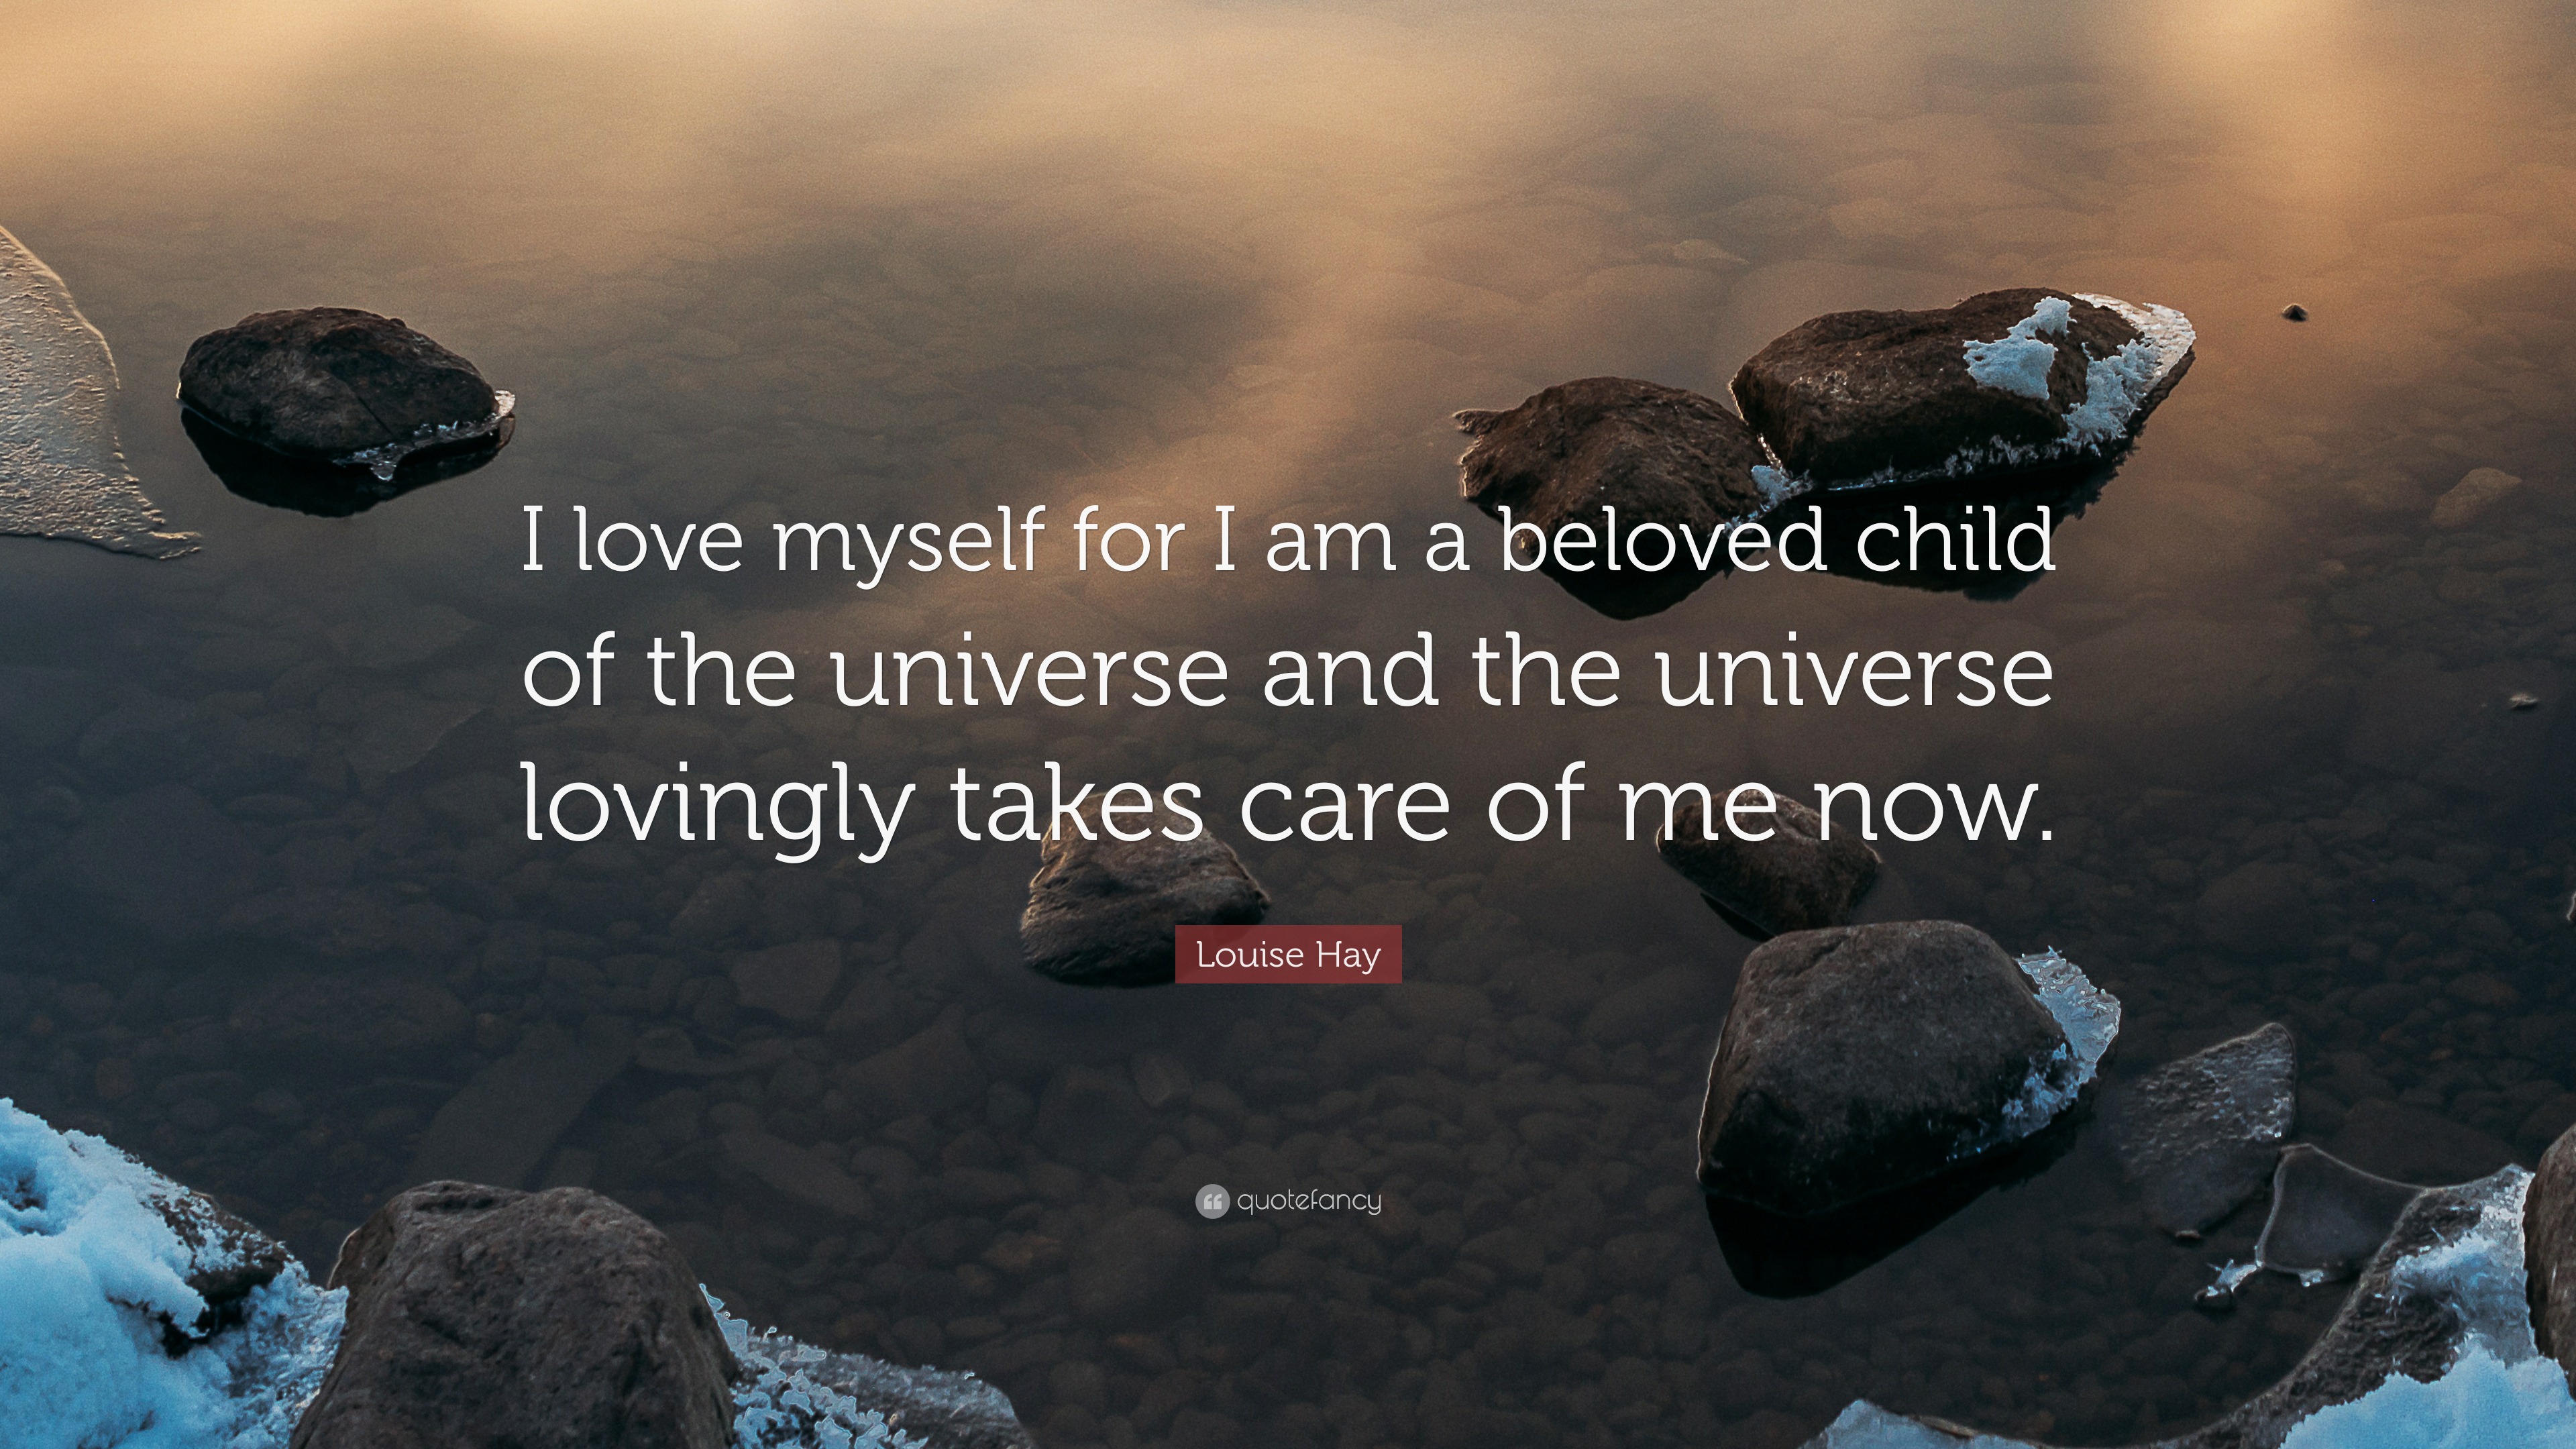 Louise Hay Quote I Love Myself For I Am A Beloved Child Of The Universe And The Universe Lovingly Takes Care Of Me Now 7 Wallpapers Quotefancy